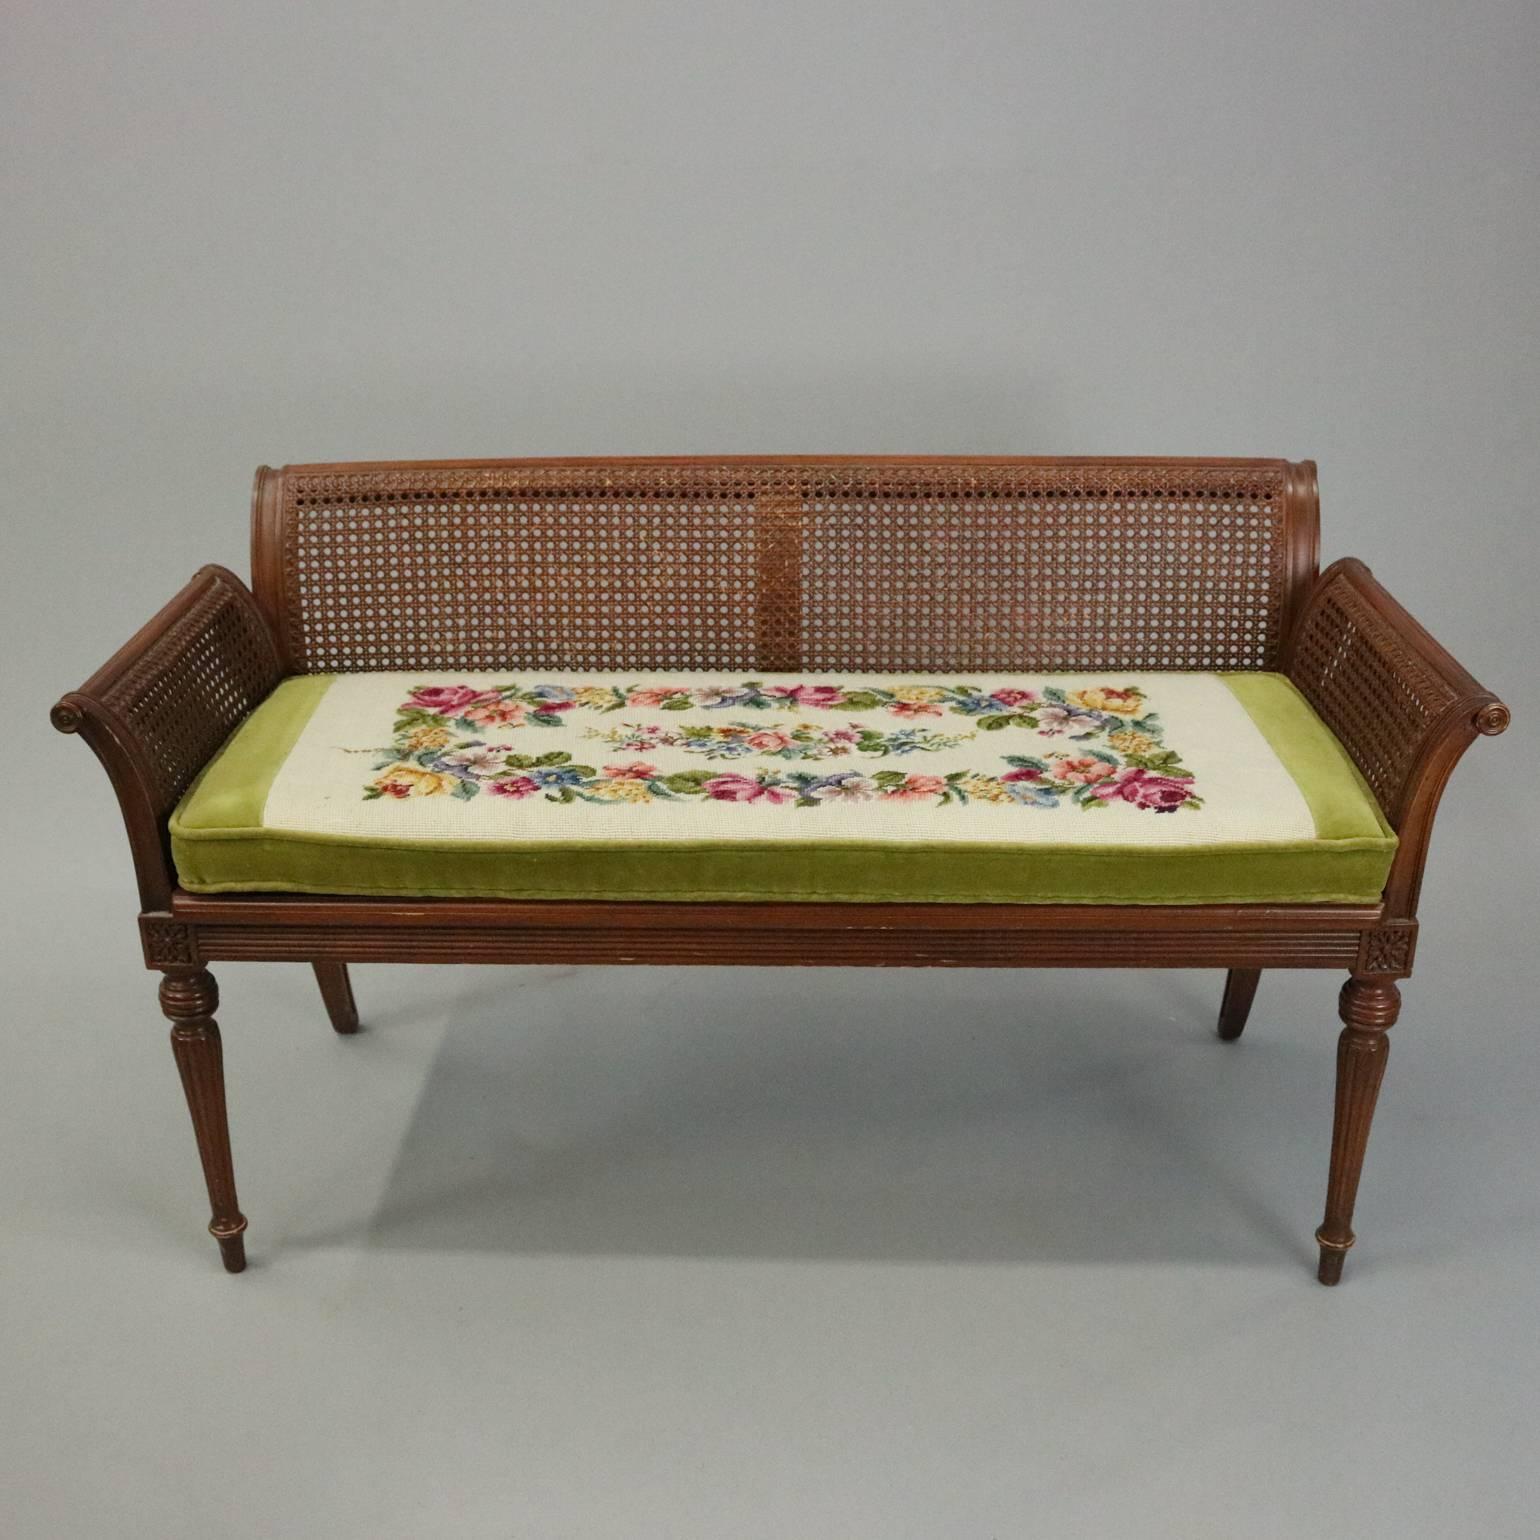 Antique French carved mahogany bench settee features caned seats, back and arms seated atop reeded framed with carved floral die joints over fluted and reeded legs and topped with floral needlepoint tapestry and velvet cushion, circa